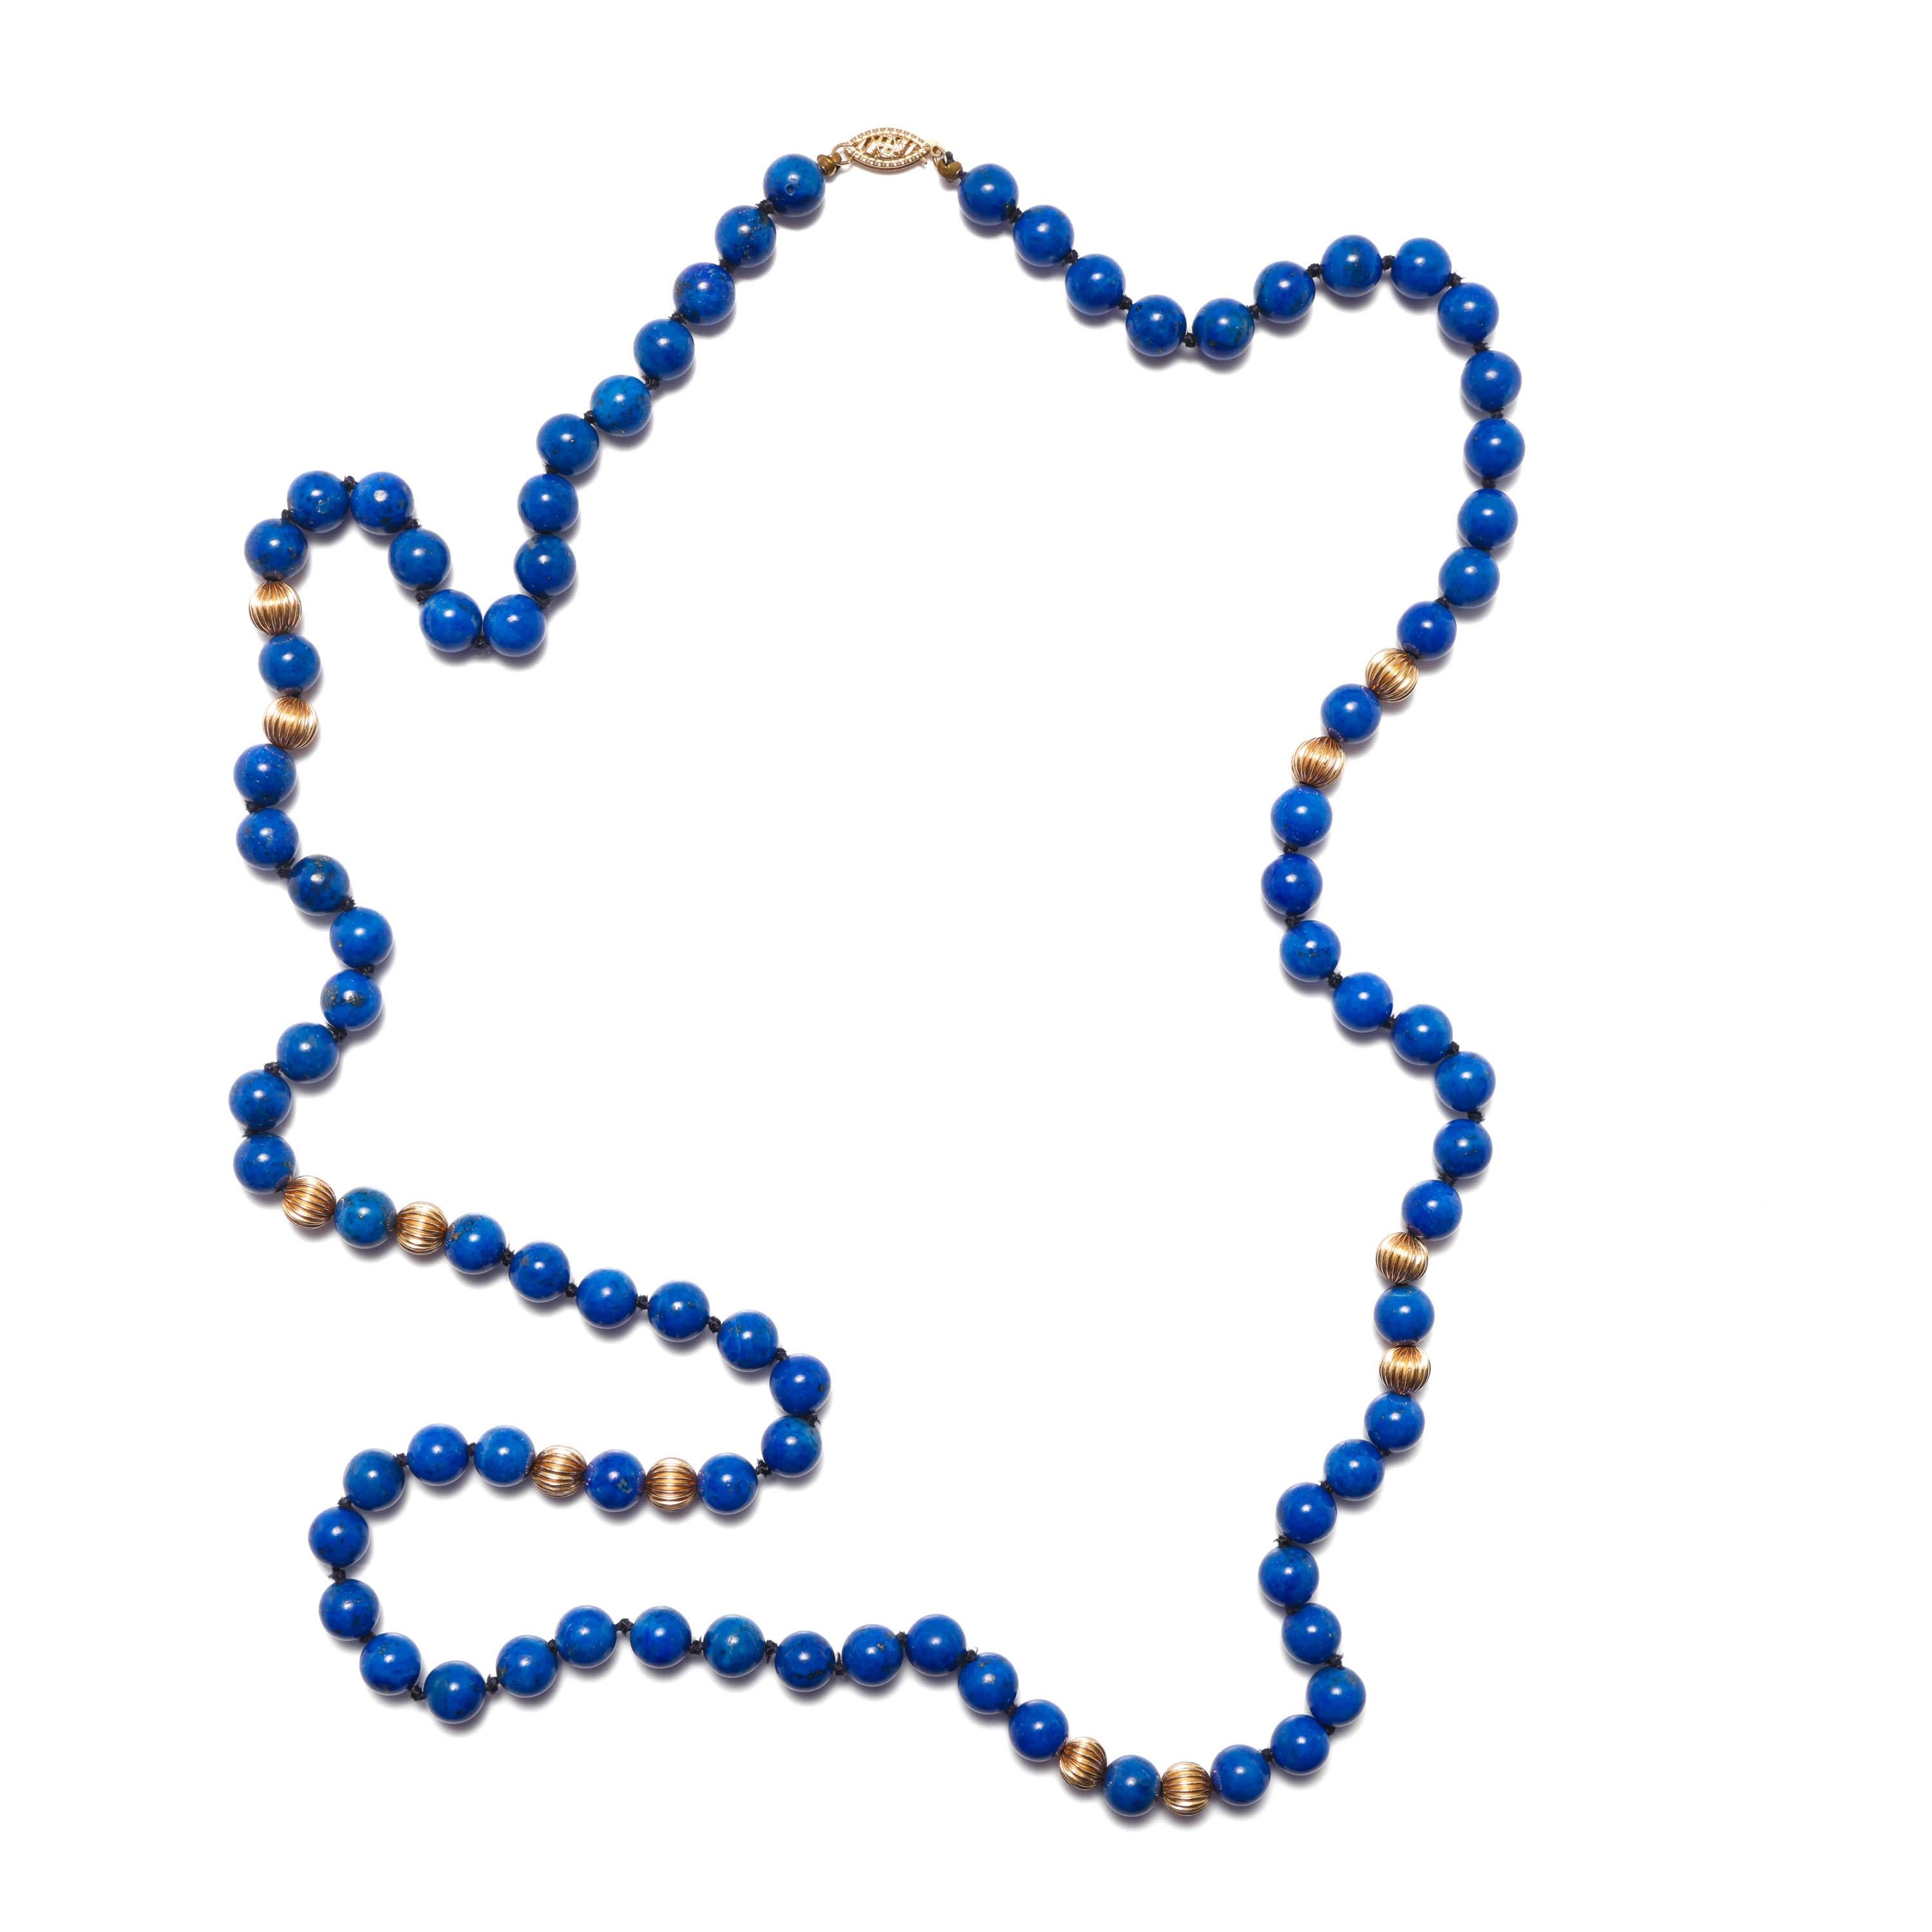 This gorgeous circa 1970s necklace is composed of ninety-two 8mm natural hand-carved and hand-polished Lapis Lazuli beads, punctuated with a dozen fluted 14K yellow gold beads. A 14k yellow gold filigree clasp completes the piece. The clasp is